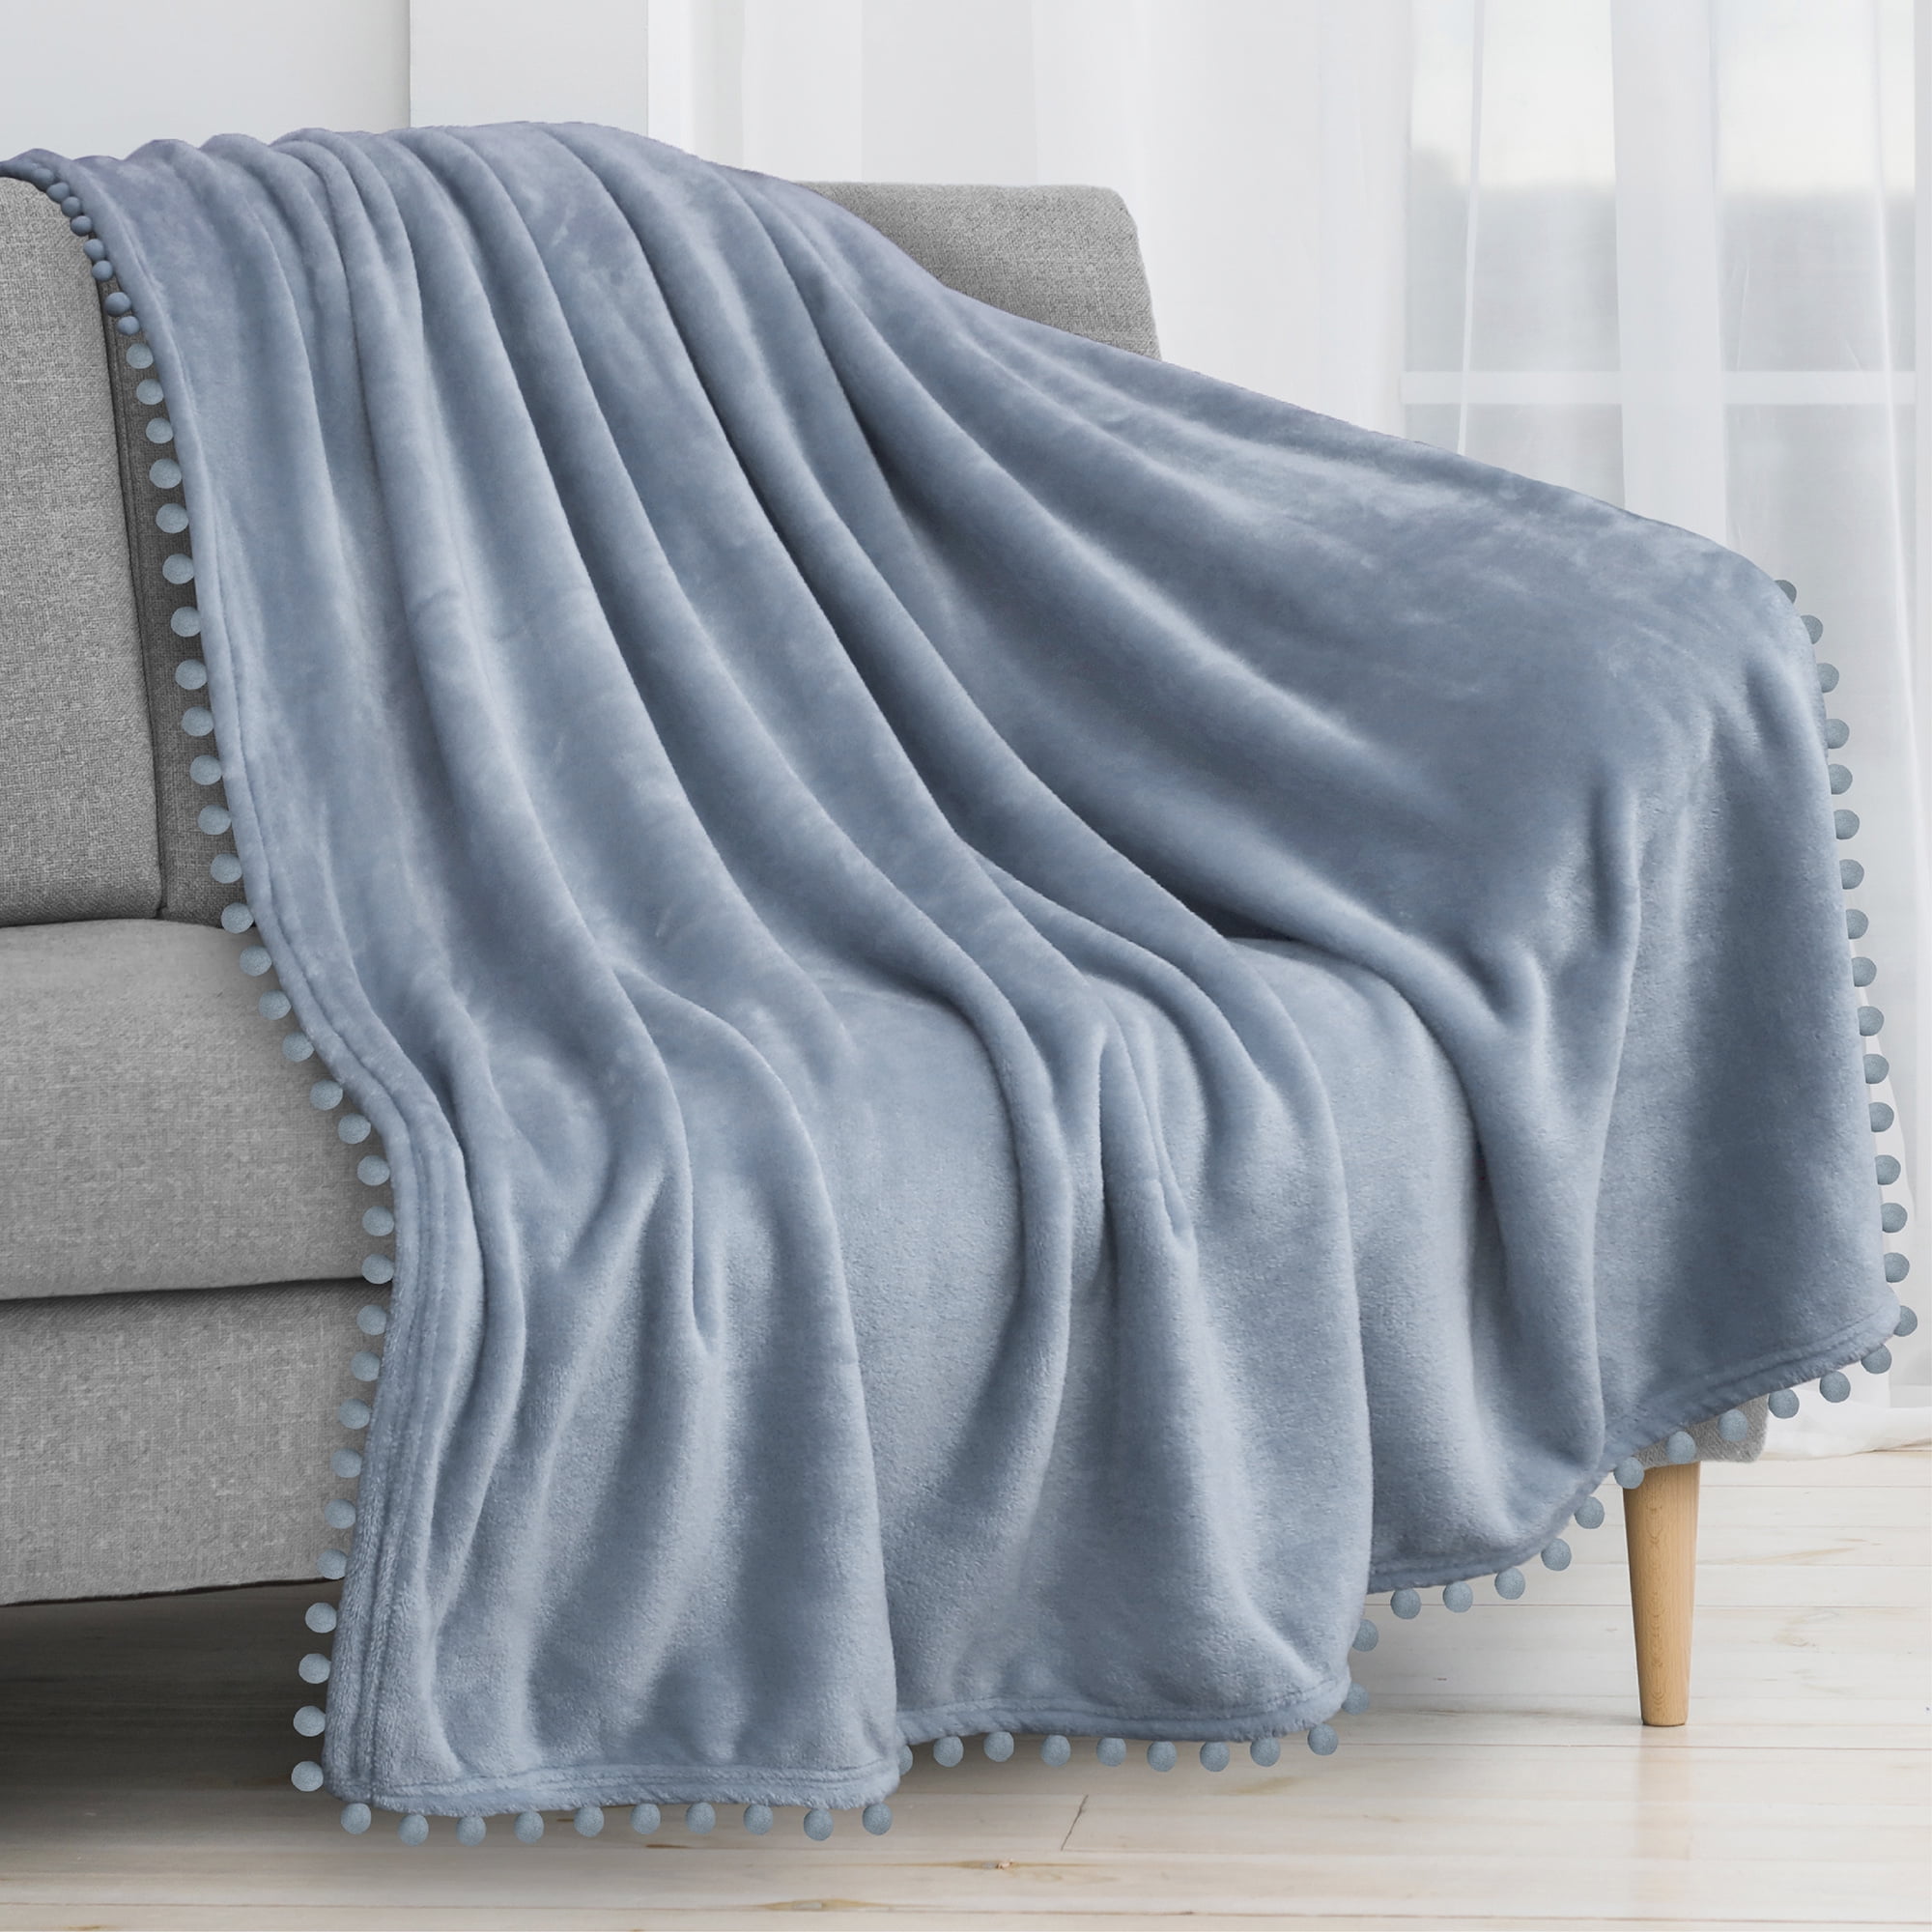 Bloomingville Blanket Throw Cotton In Blue For Sofa Cot Pram Pets RRP £20 